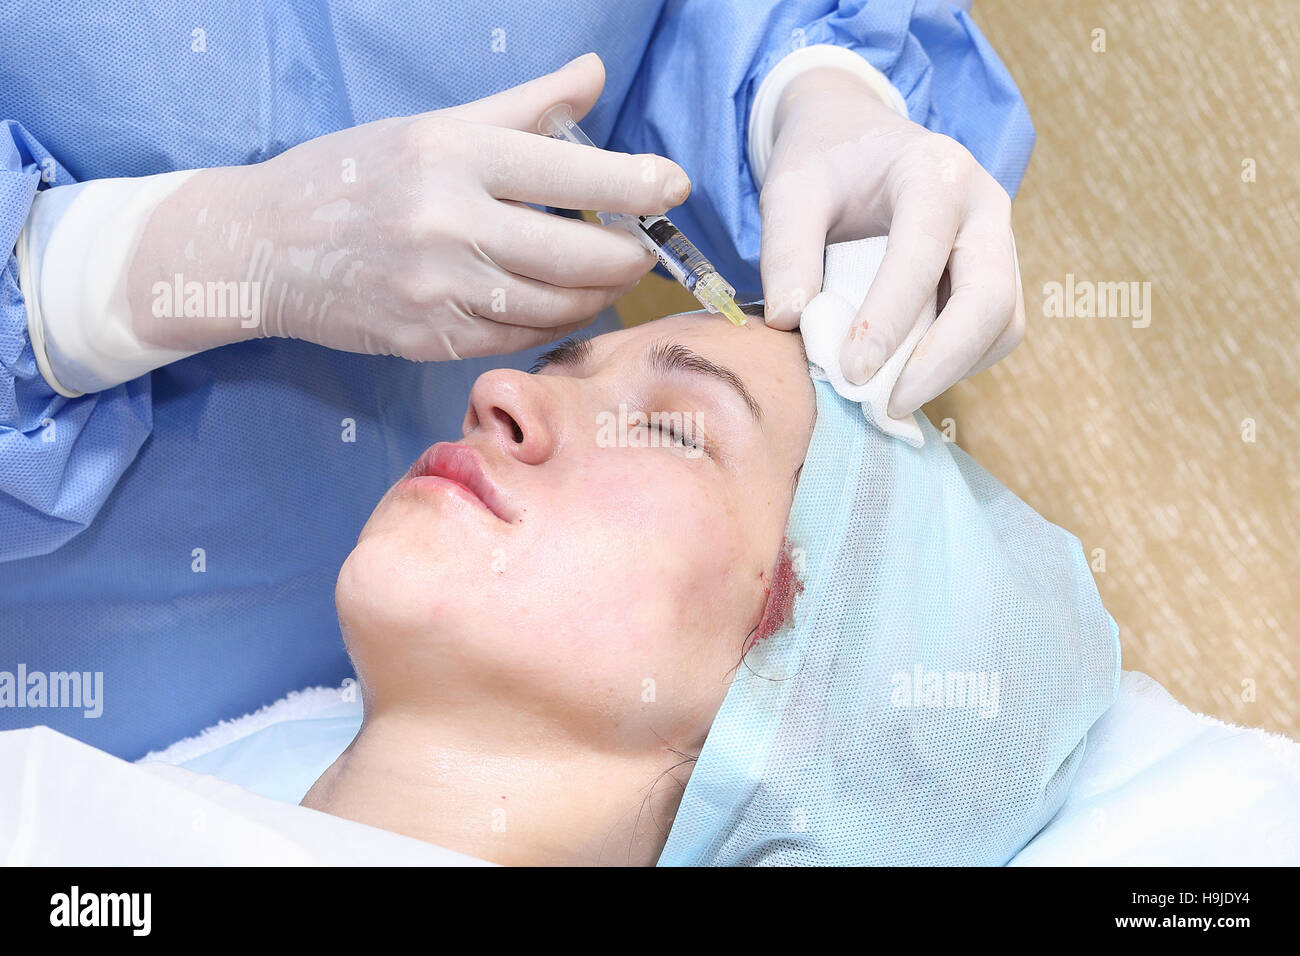 Bio-revitalization with hyaluronic acid treatment of mimic wrinkles Stock Photo